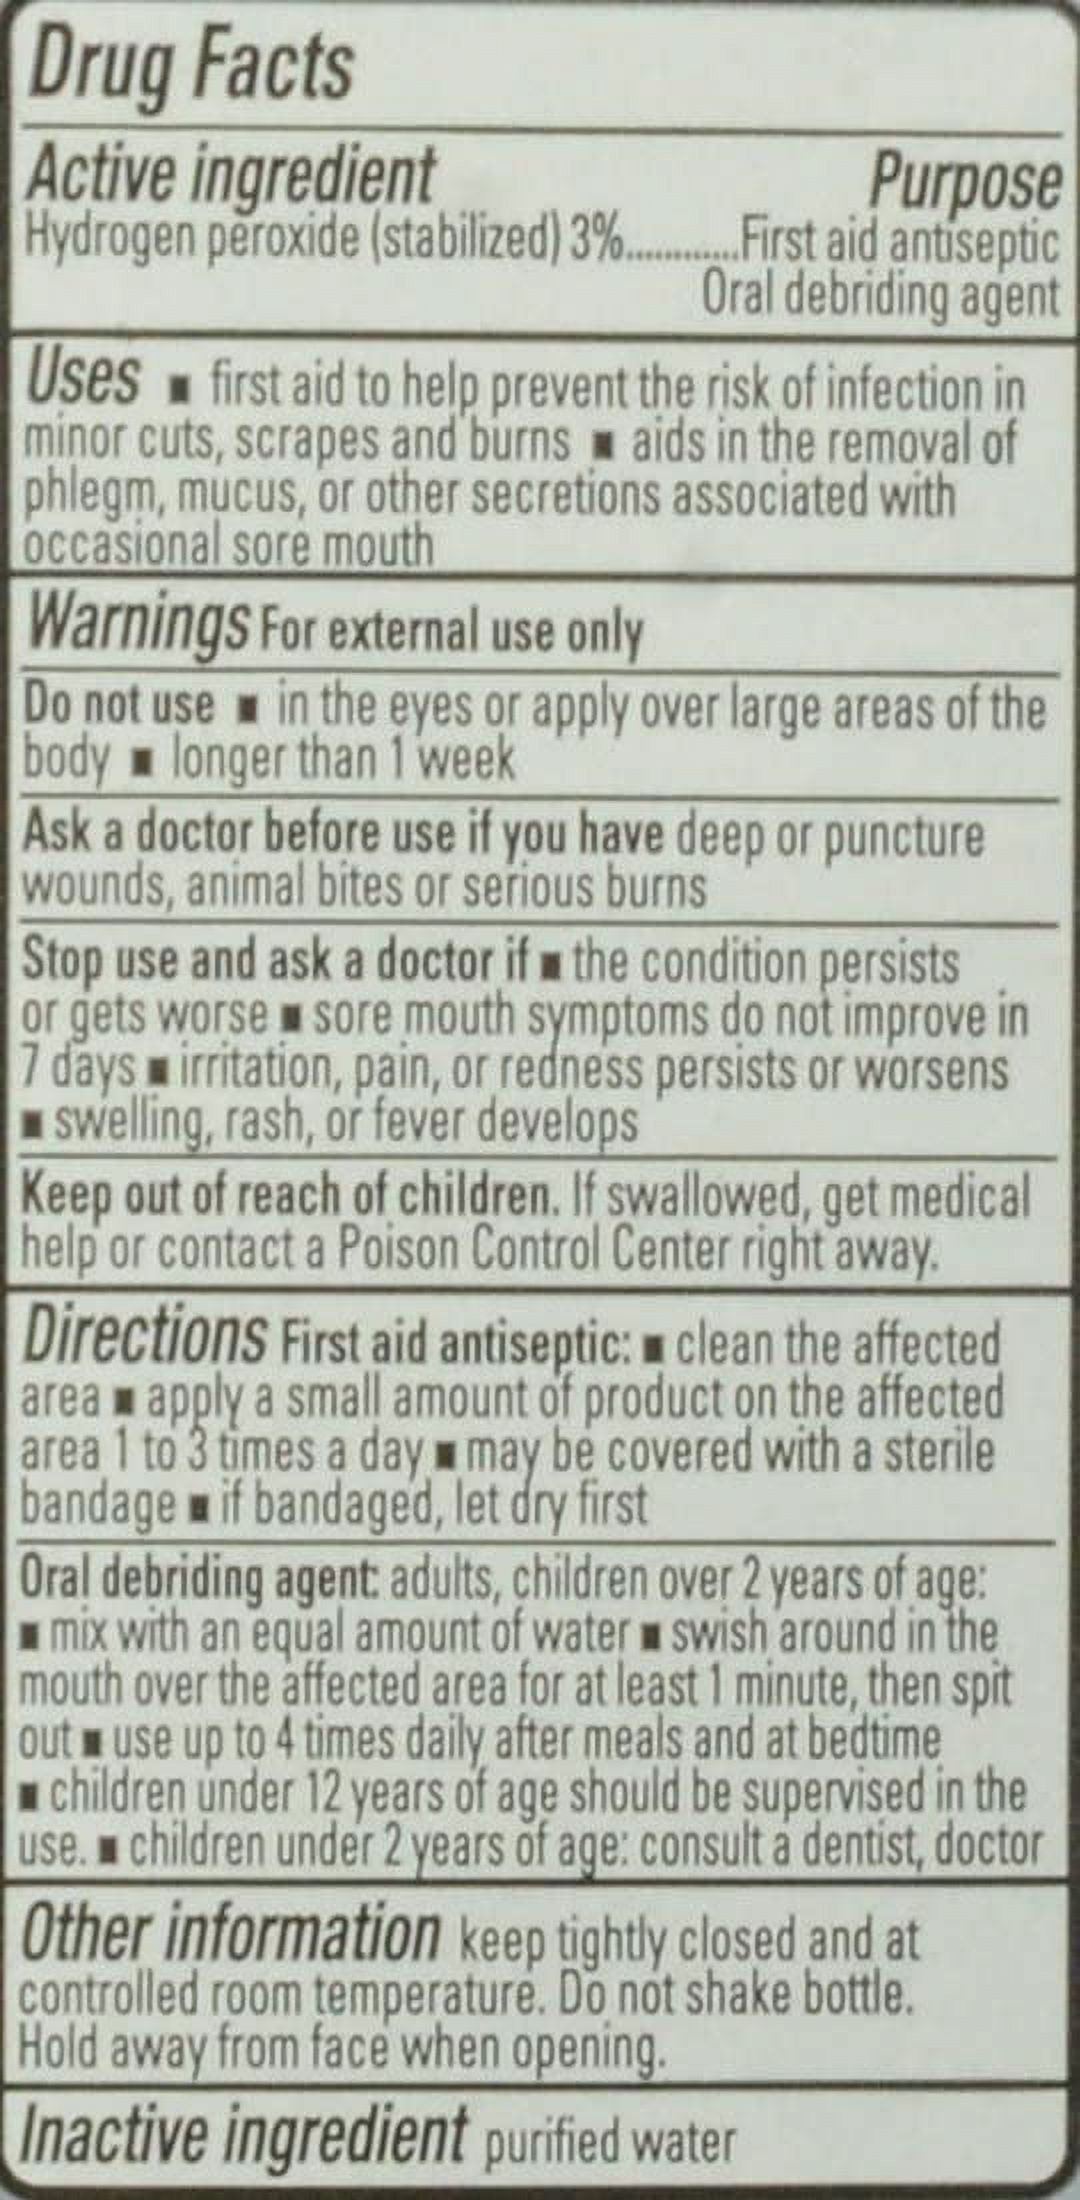 Swan Hydrogen Peroxide Topical Solution, 16 oz - image 4 of 4